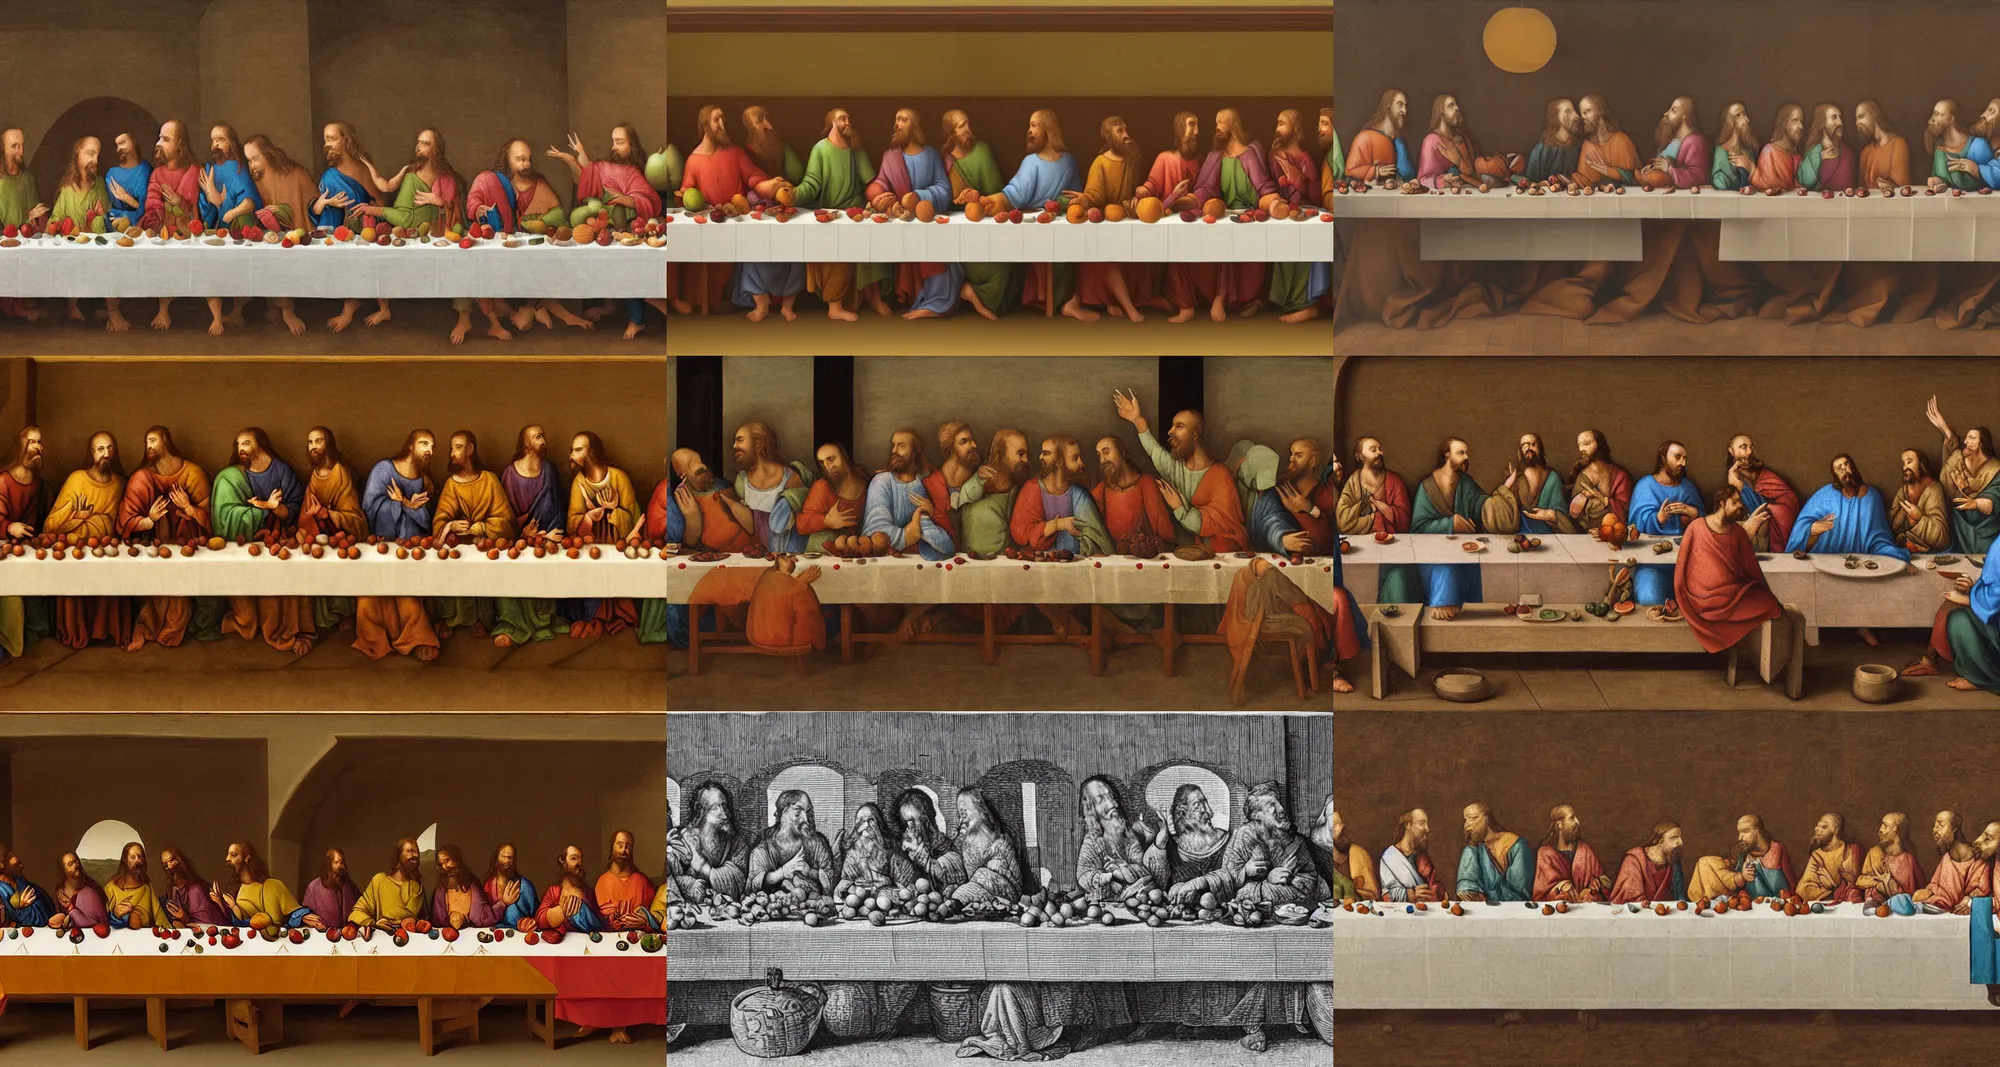 Prompt: Anthropomorphic fruits in The Last Supper